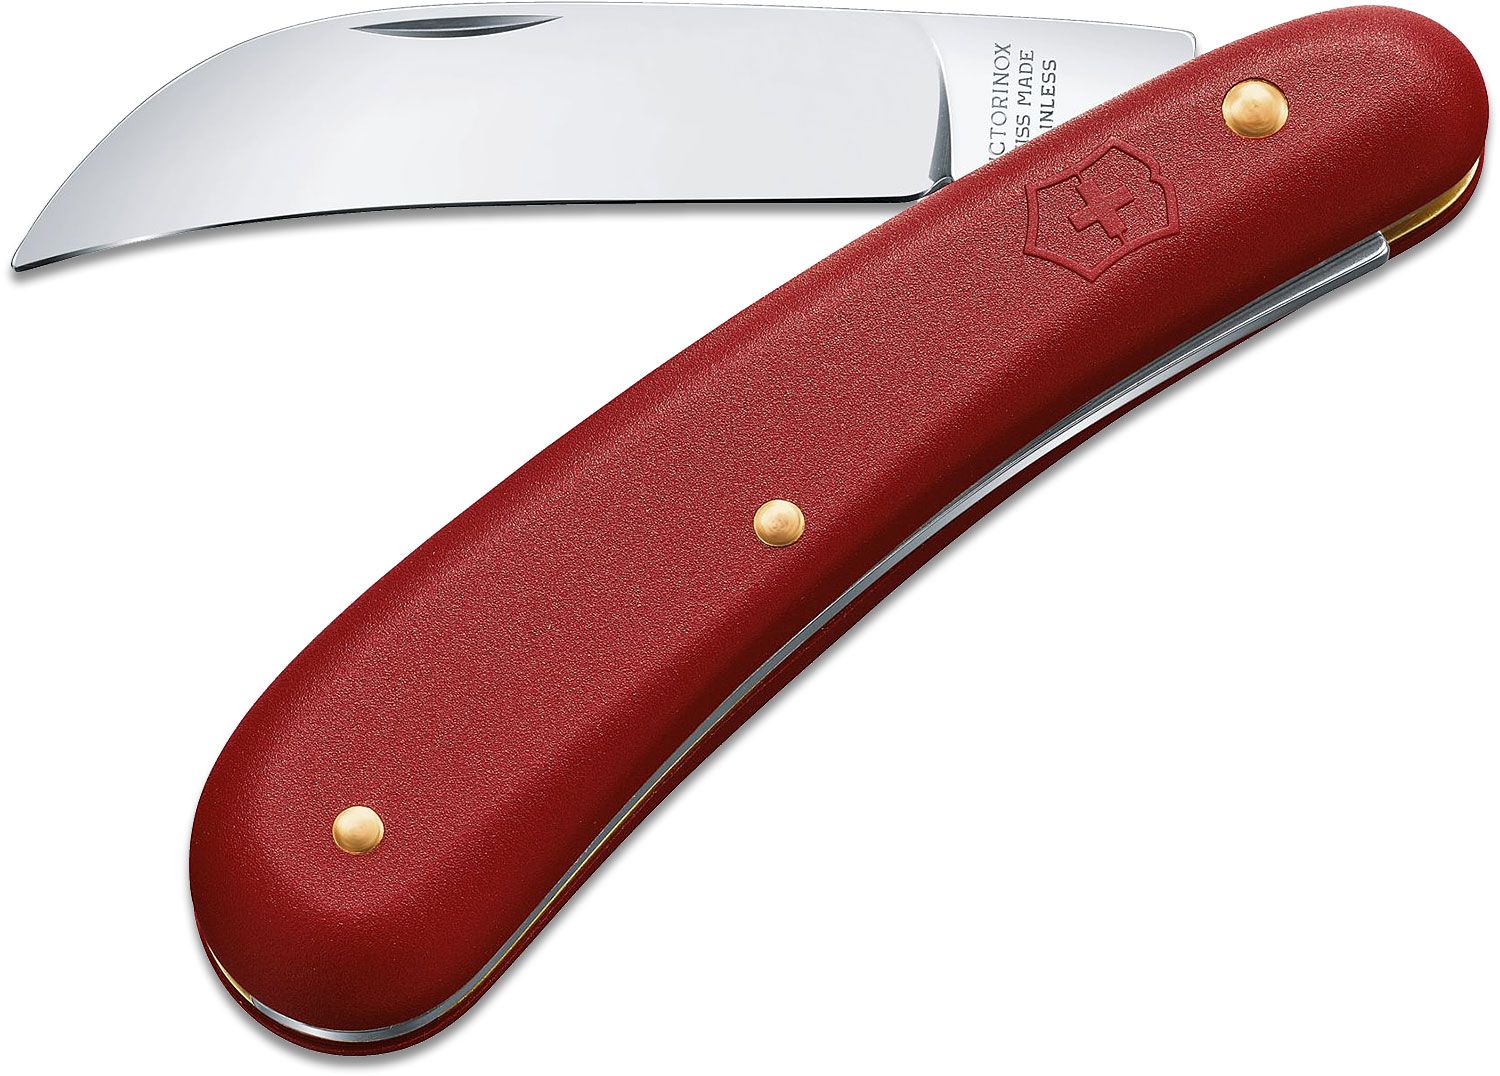 Victorinox Swiss Army Small Pruning Knife, Red Zytel Handle, 2.8 Blade -  KnifeCenter - 1.9201